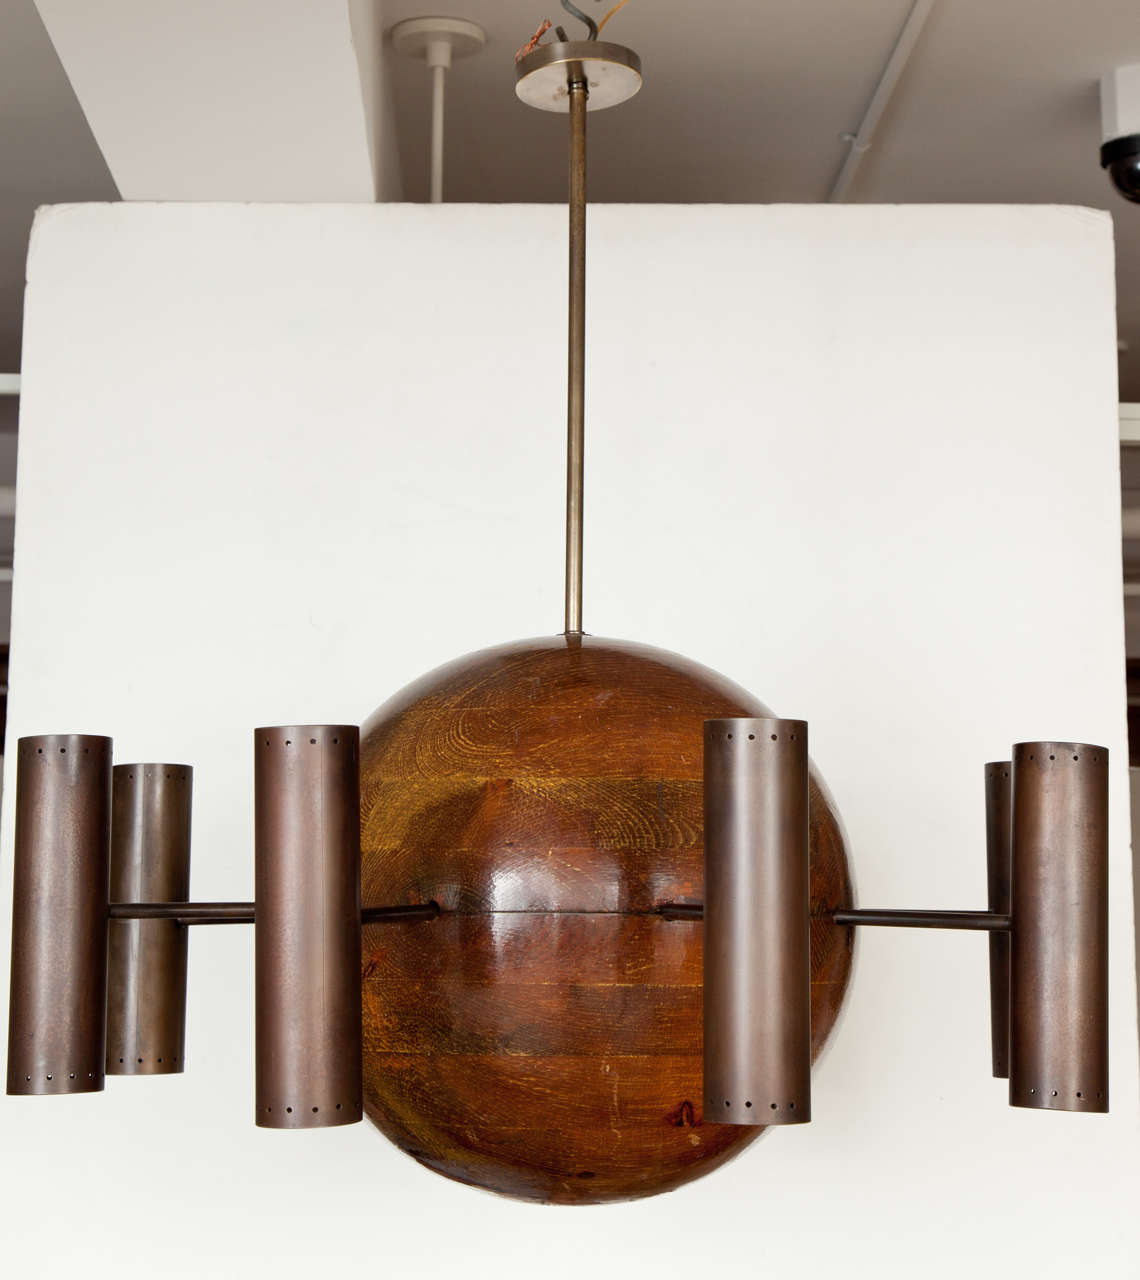 A massive oak sphere centers eight arms with pierced cylindrical patinated steel shades. Each shade contains two lights, one facing up, one down. Hand-made craftsman piece, Northern California, early 1960s. Newly rewired. Chandelier body is 22